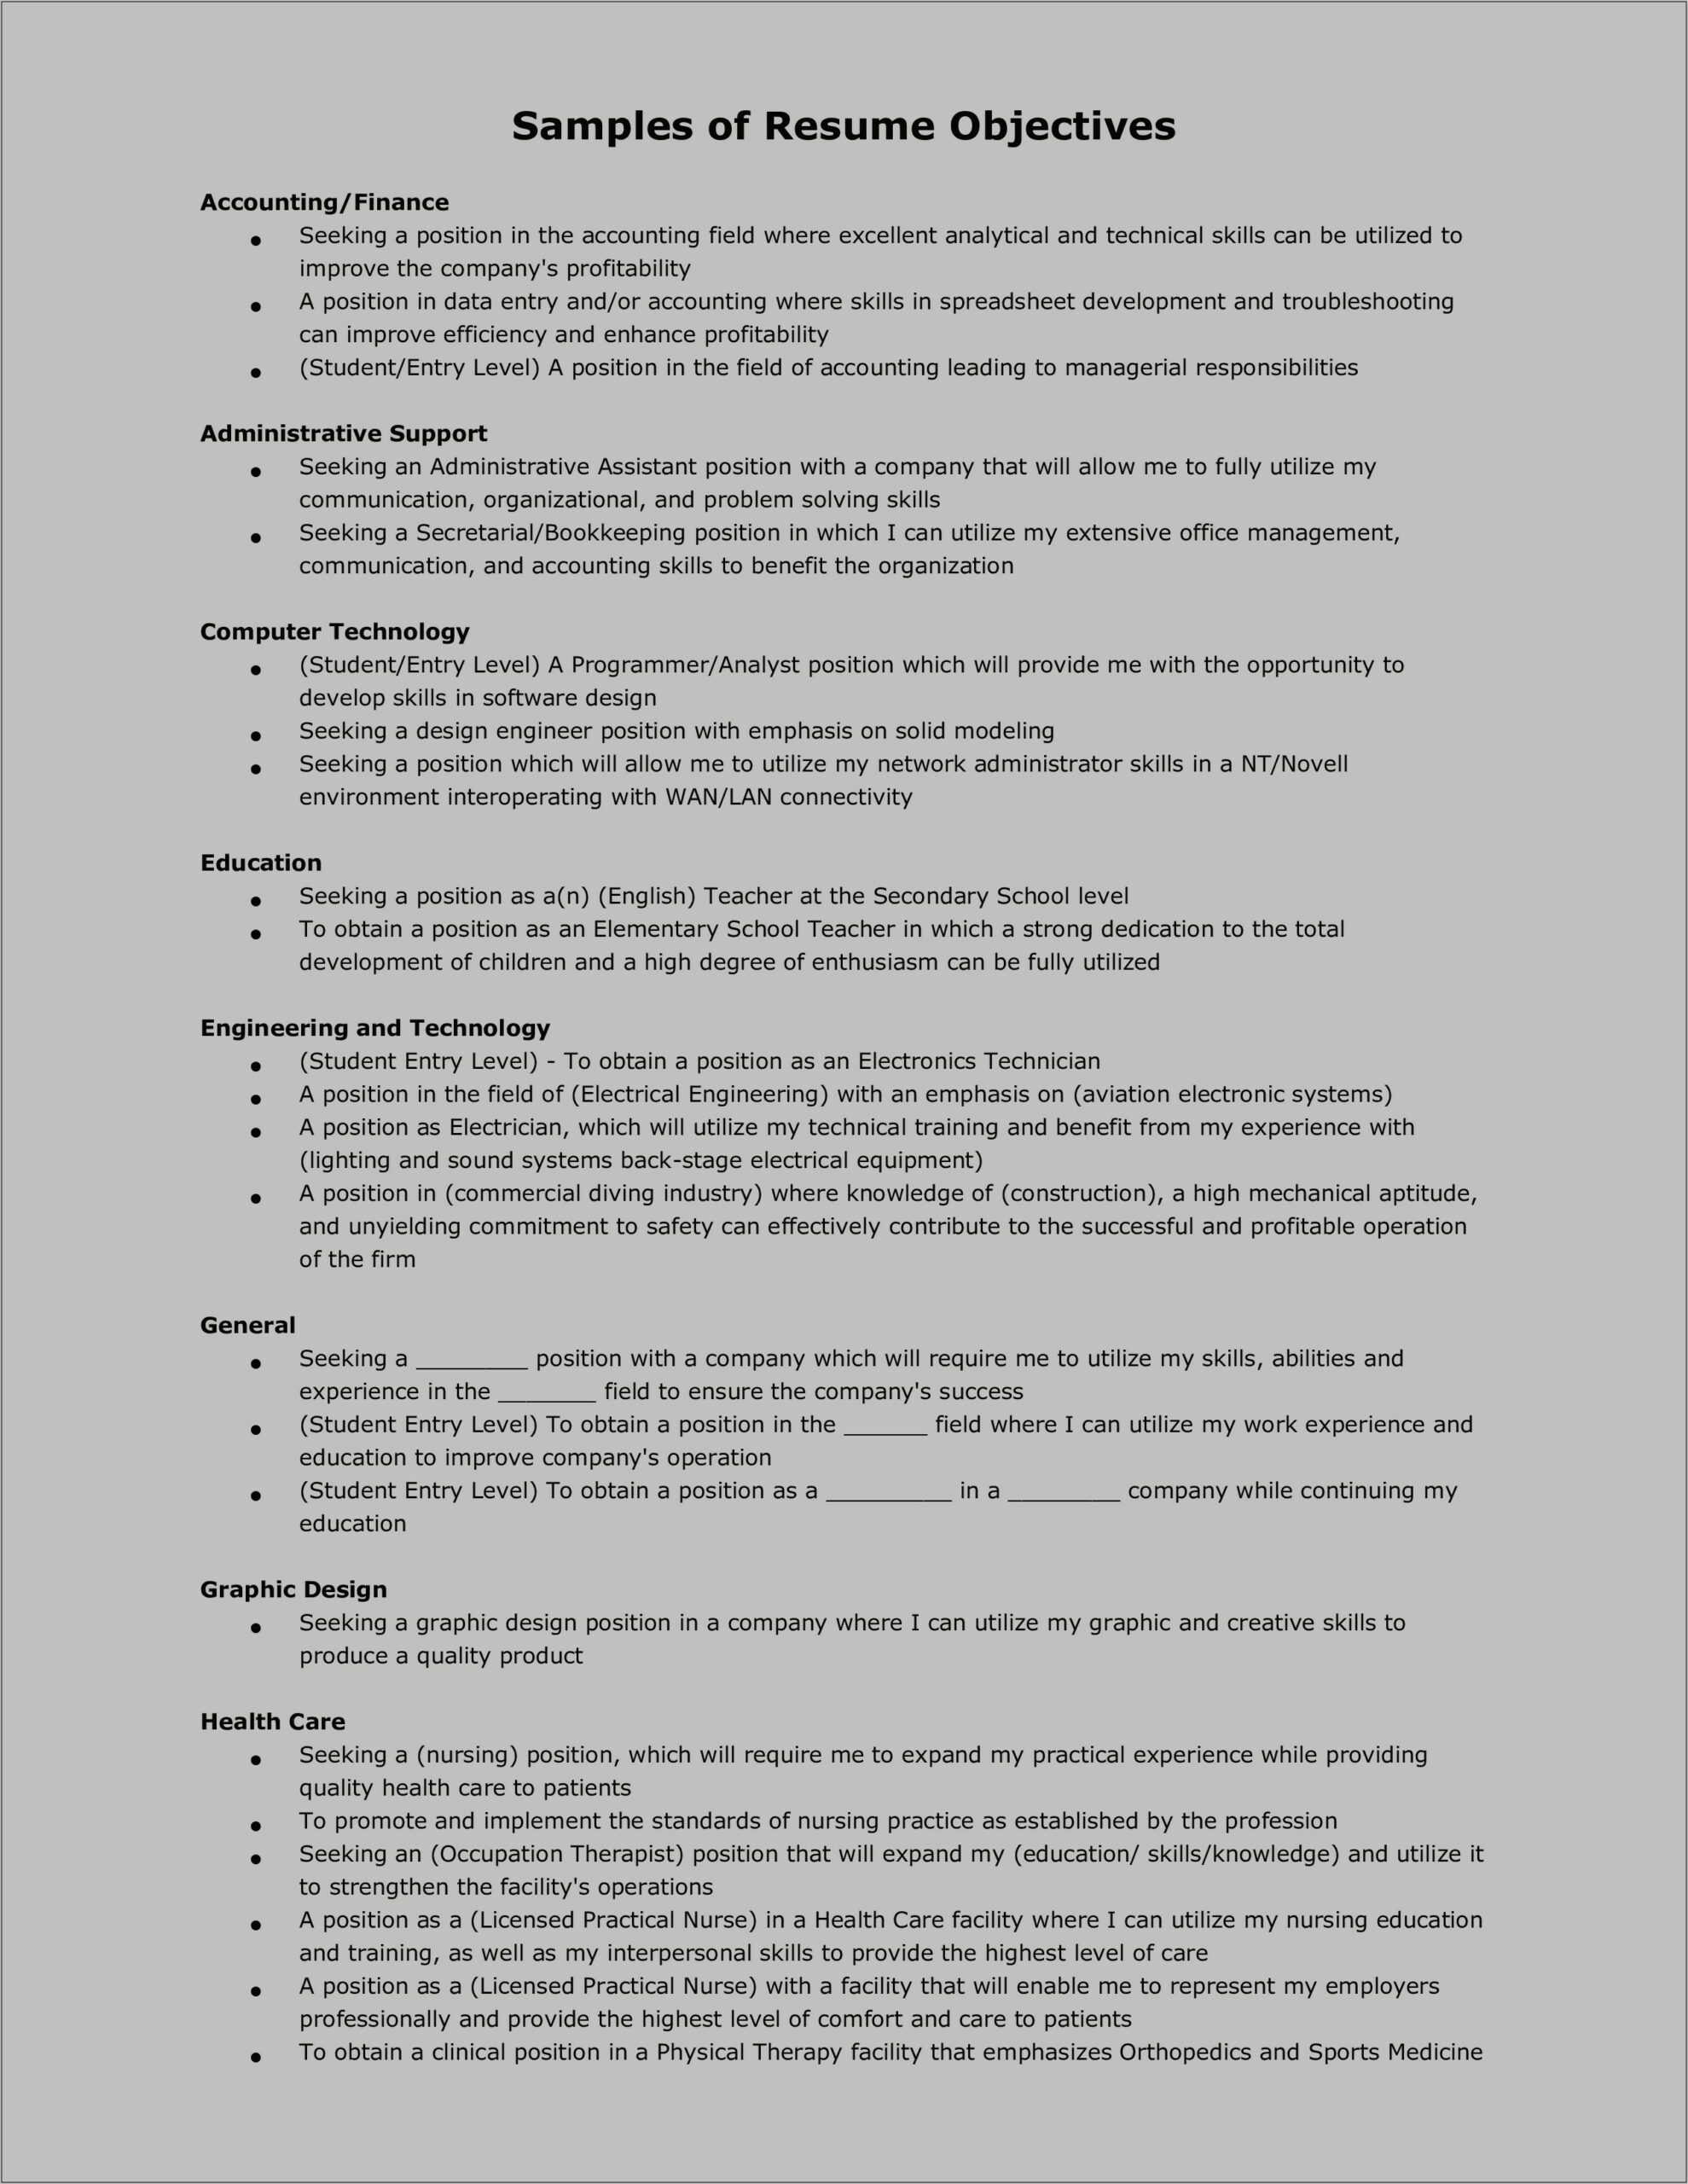 Resume Objectives For Administrative Assistant Position